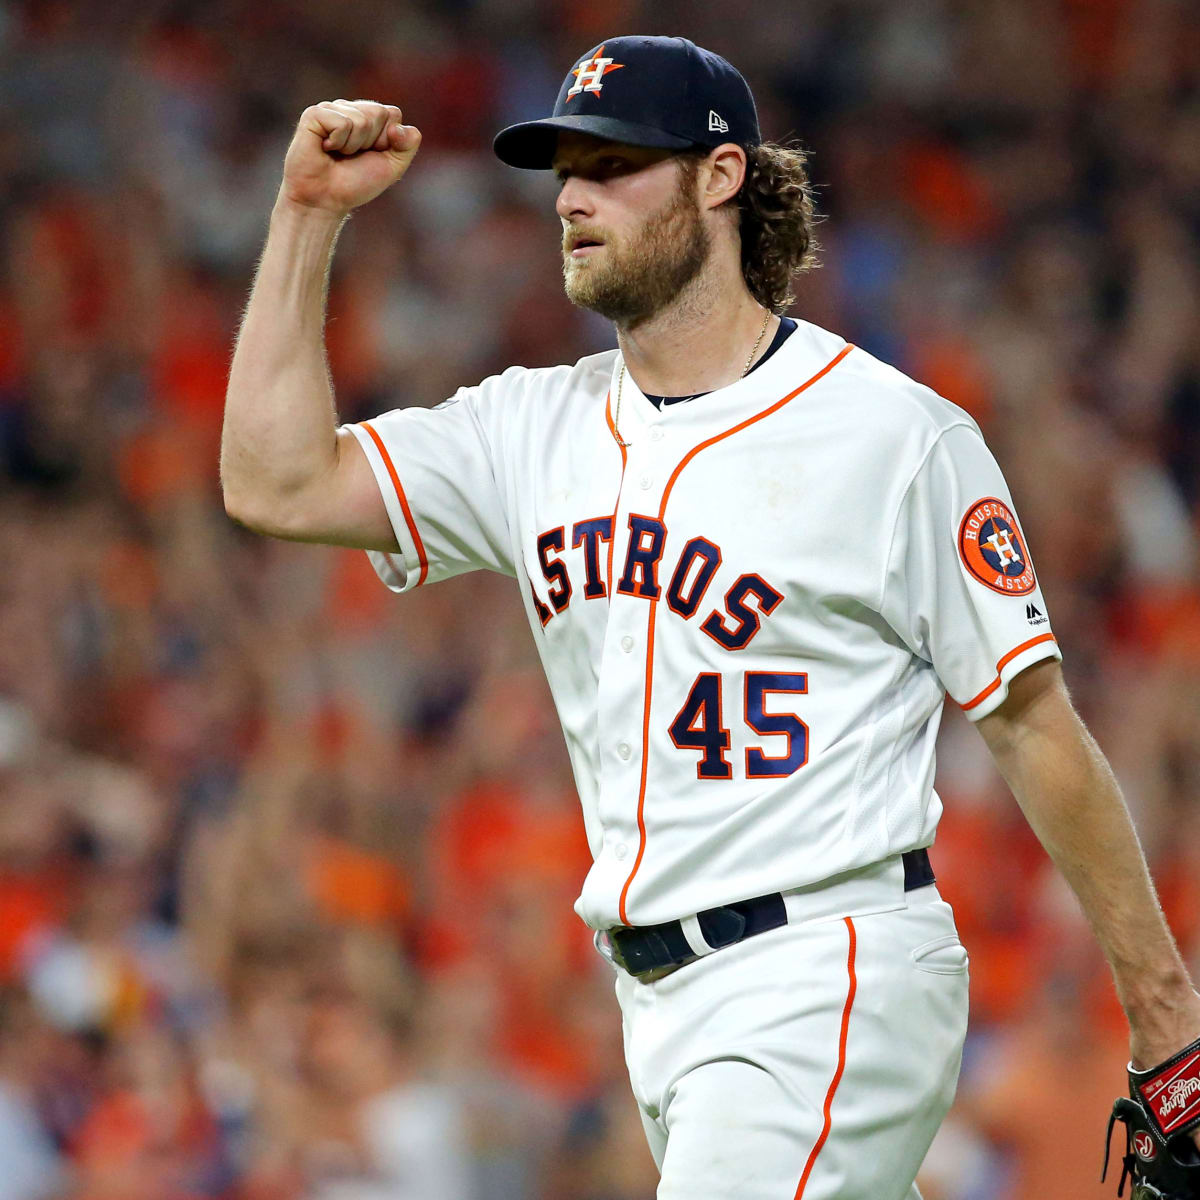 Yankees' Gerrit Cole wants to go into All-Star break with wins